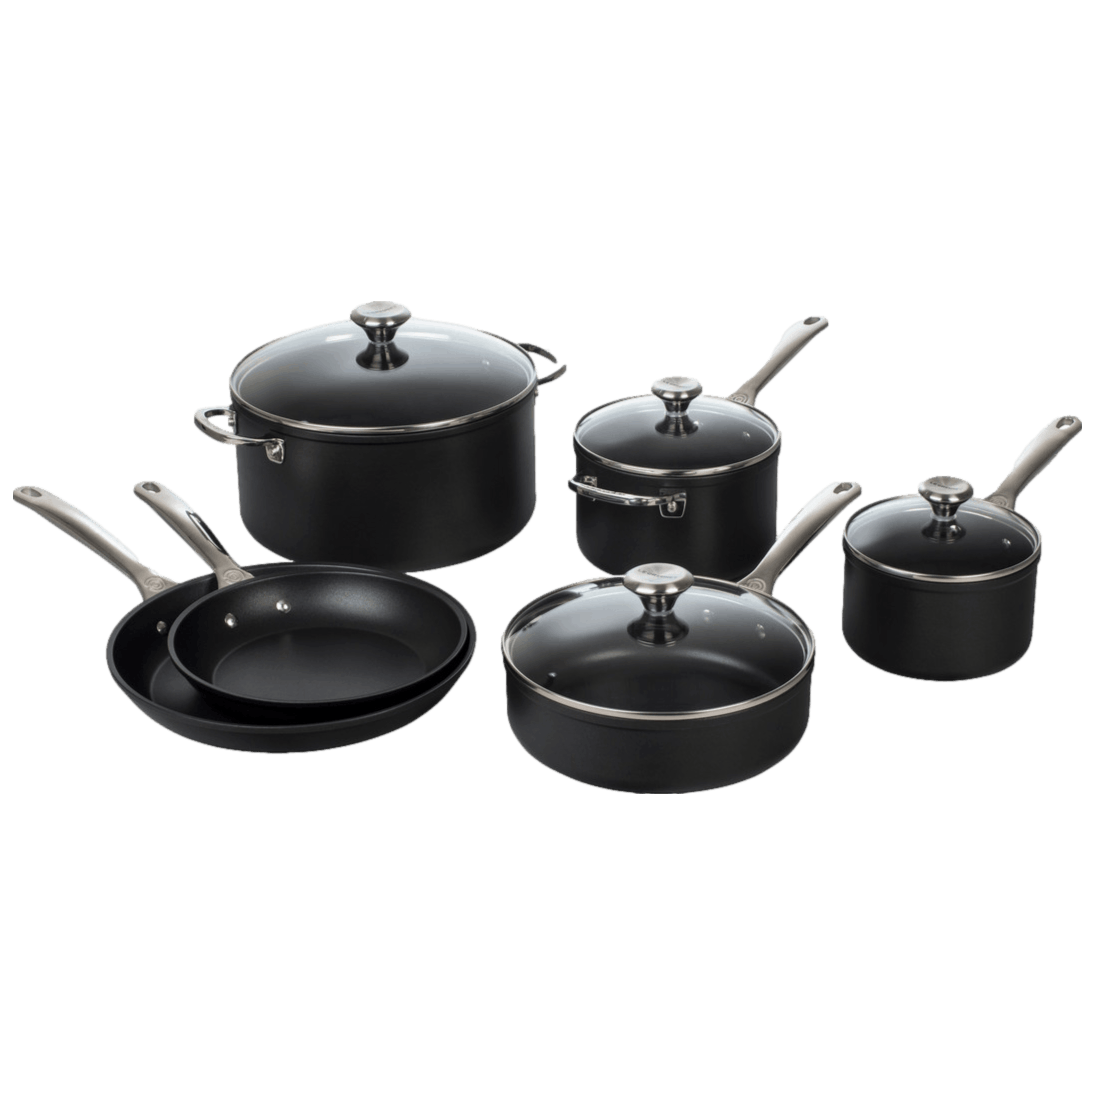 Le Creuset Skillet Grill Review: Is It Worth Your Money? – SheKnows